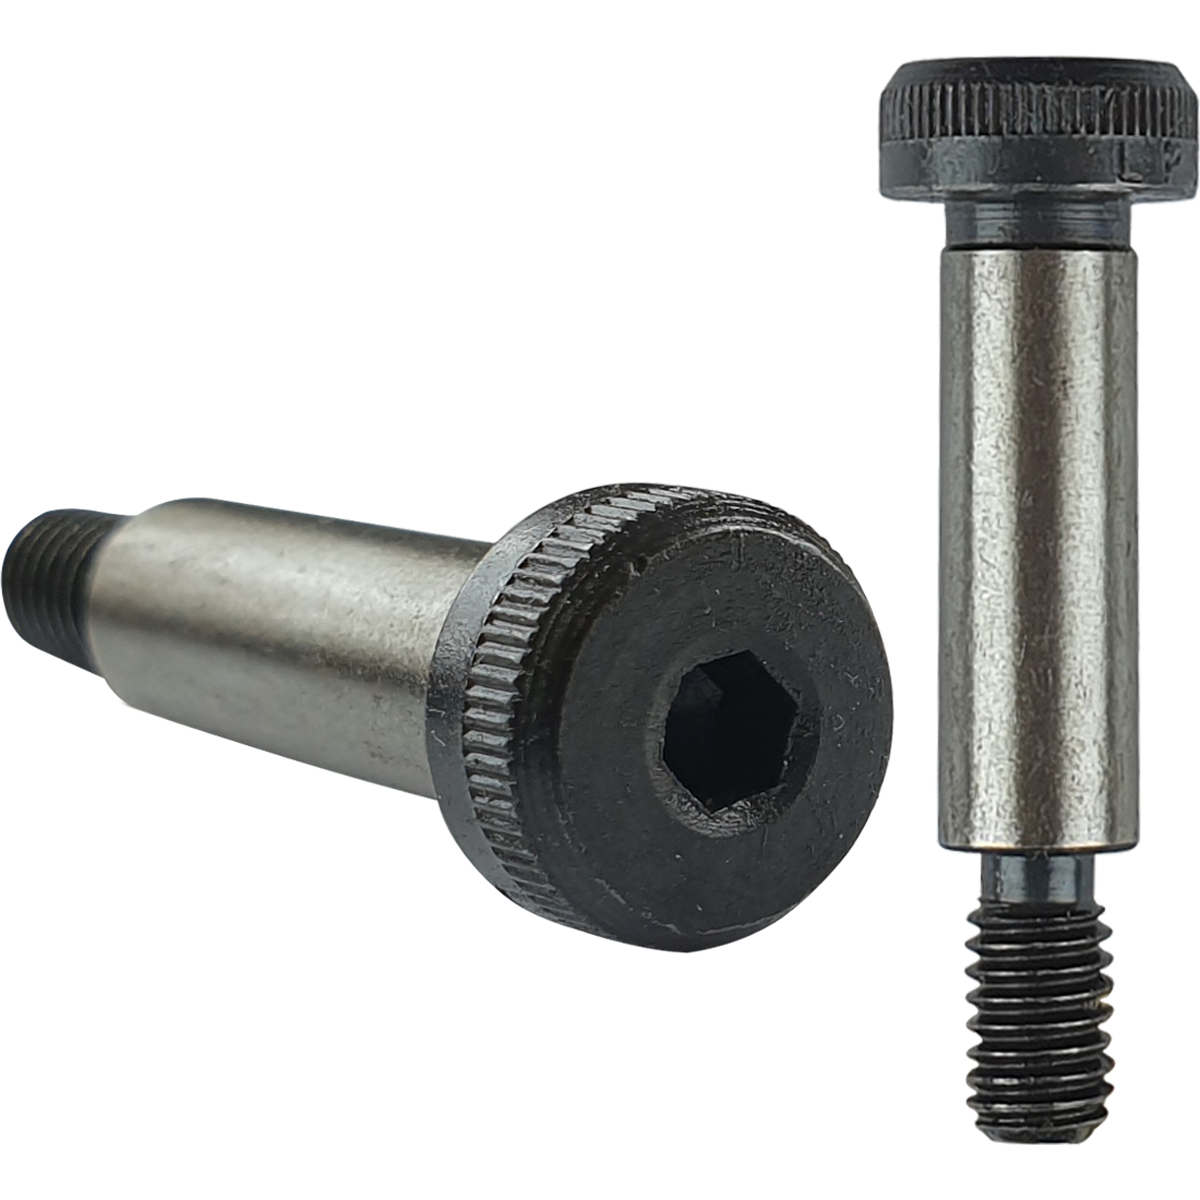 A growing range of self-colour socket shoulder screws, a machine screw, also known as shoulder bolts, available in a variety of sizes.